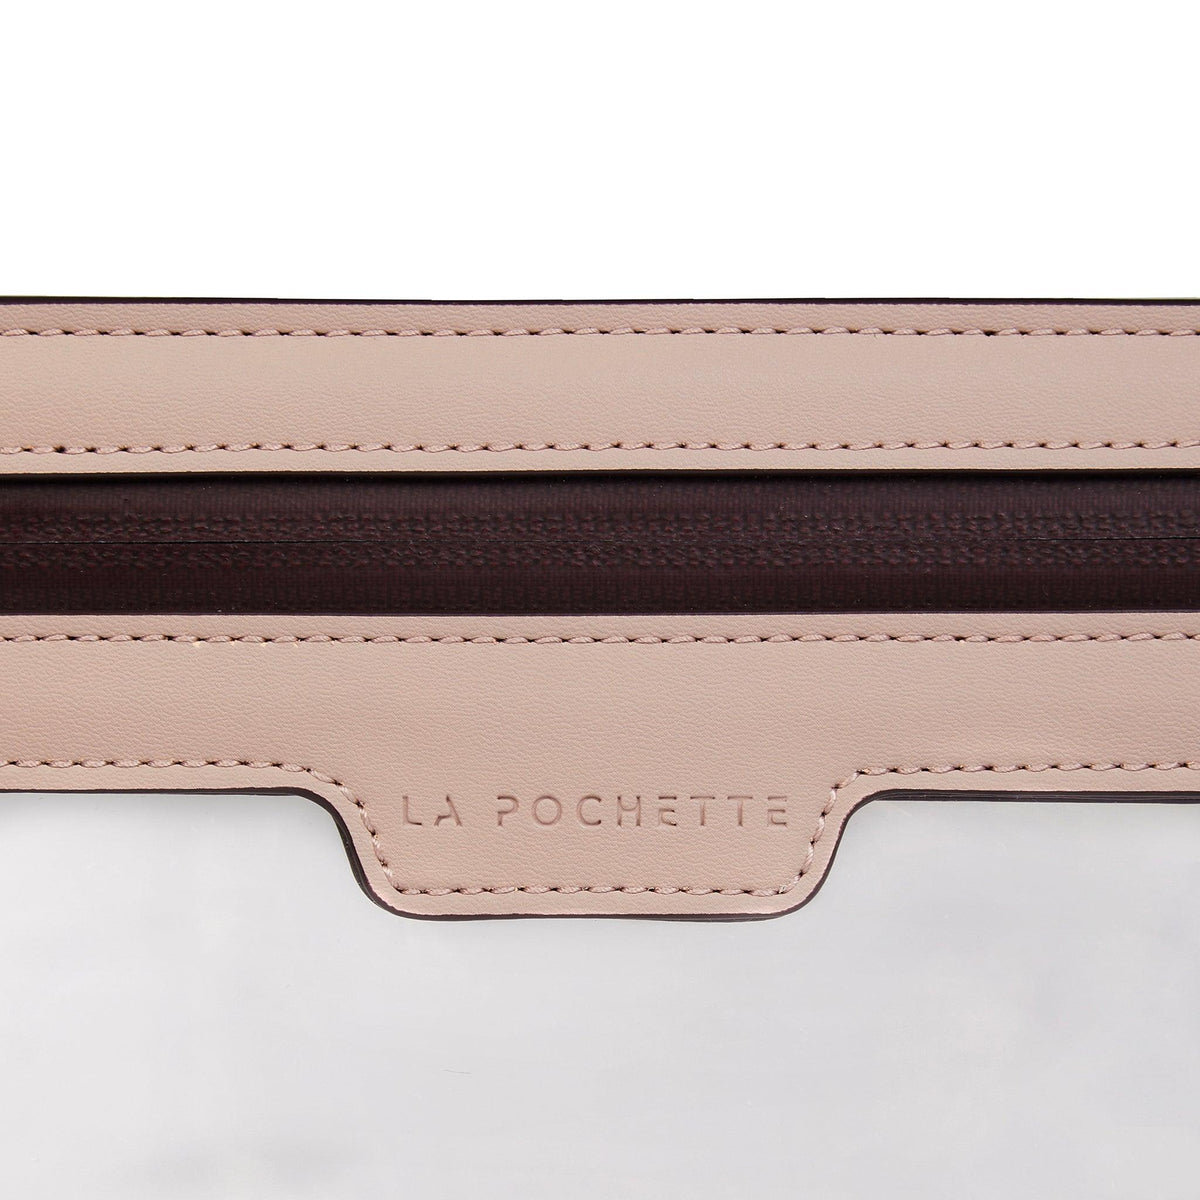 Anywhere Everywhere Wallet in Oxblood Rose colourway, showing Logo detail